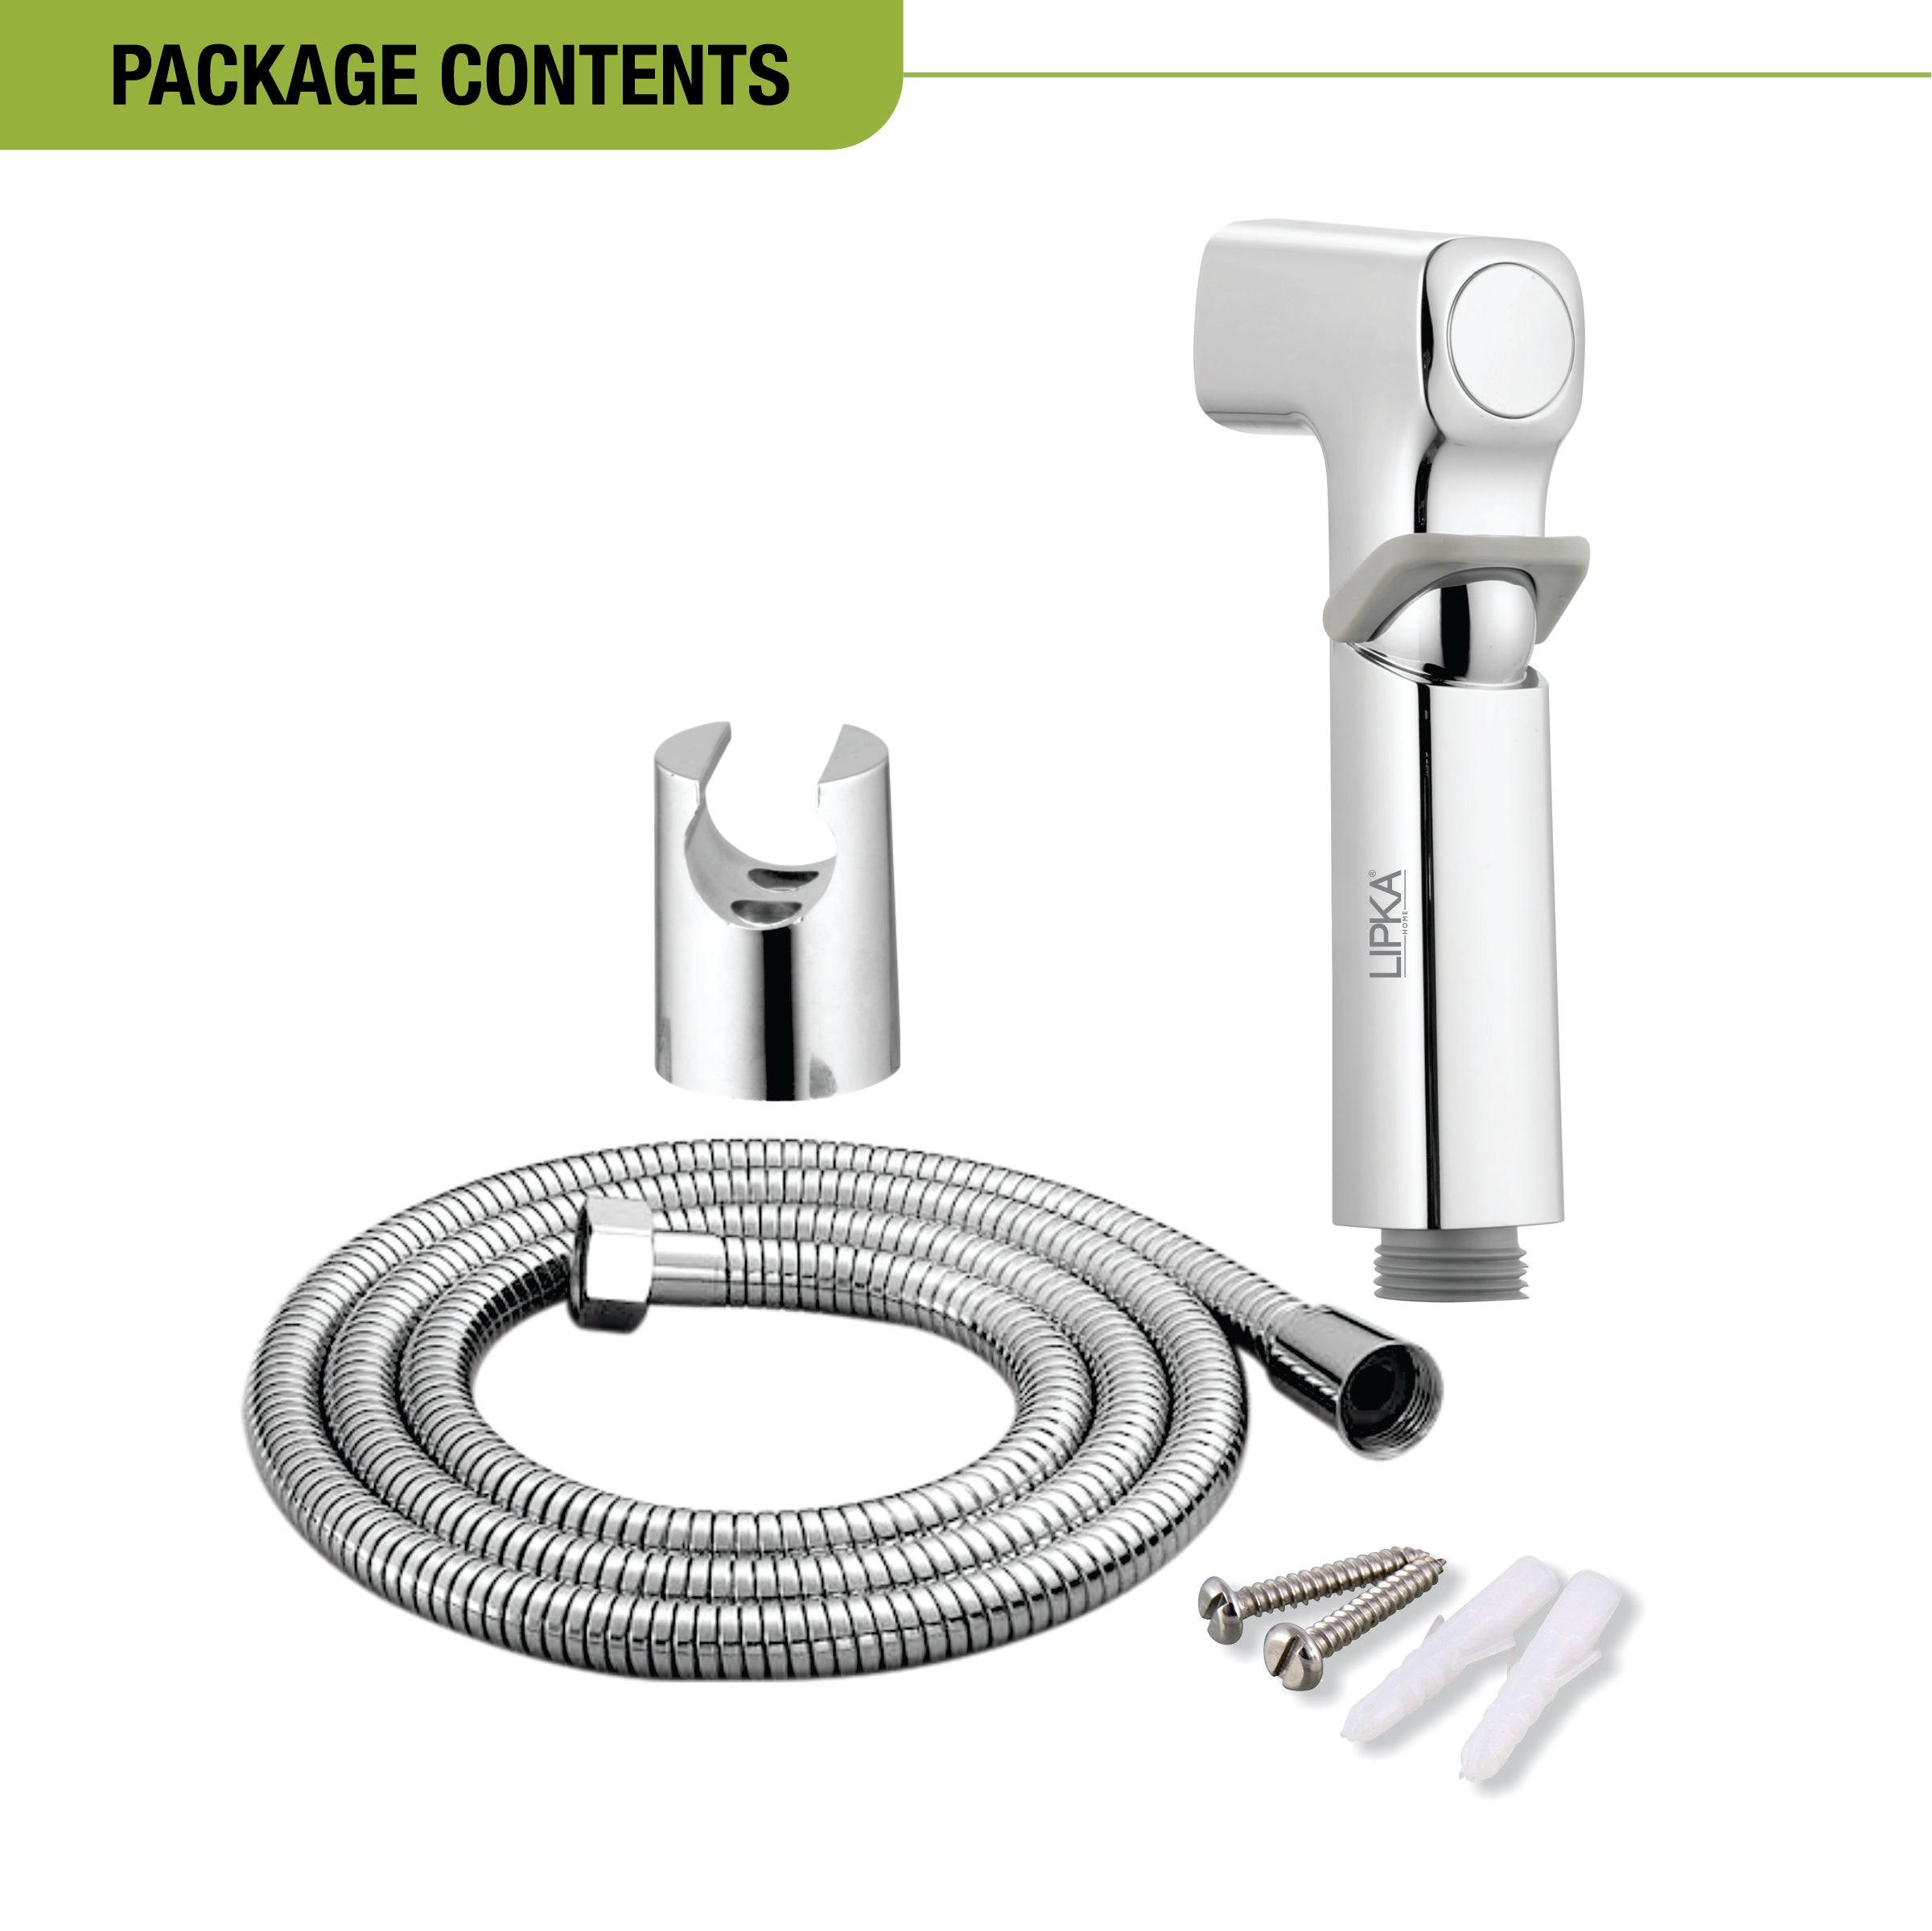 Magna Health Faucet (Complete Set) package includes